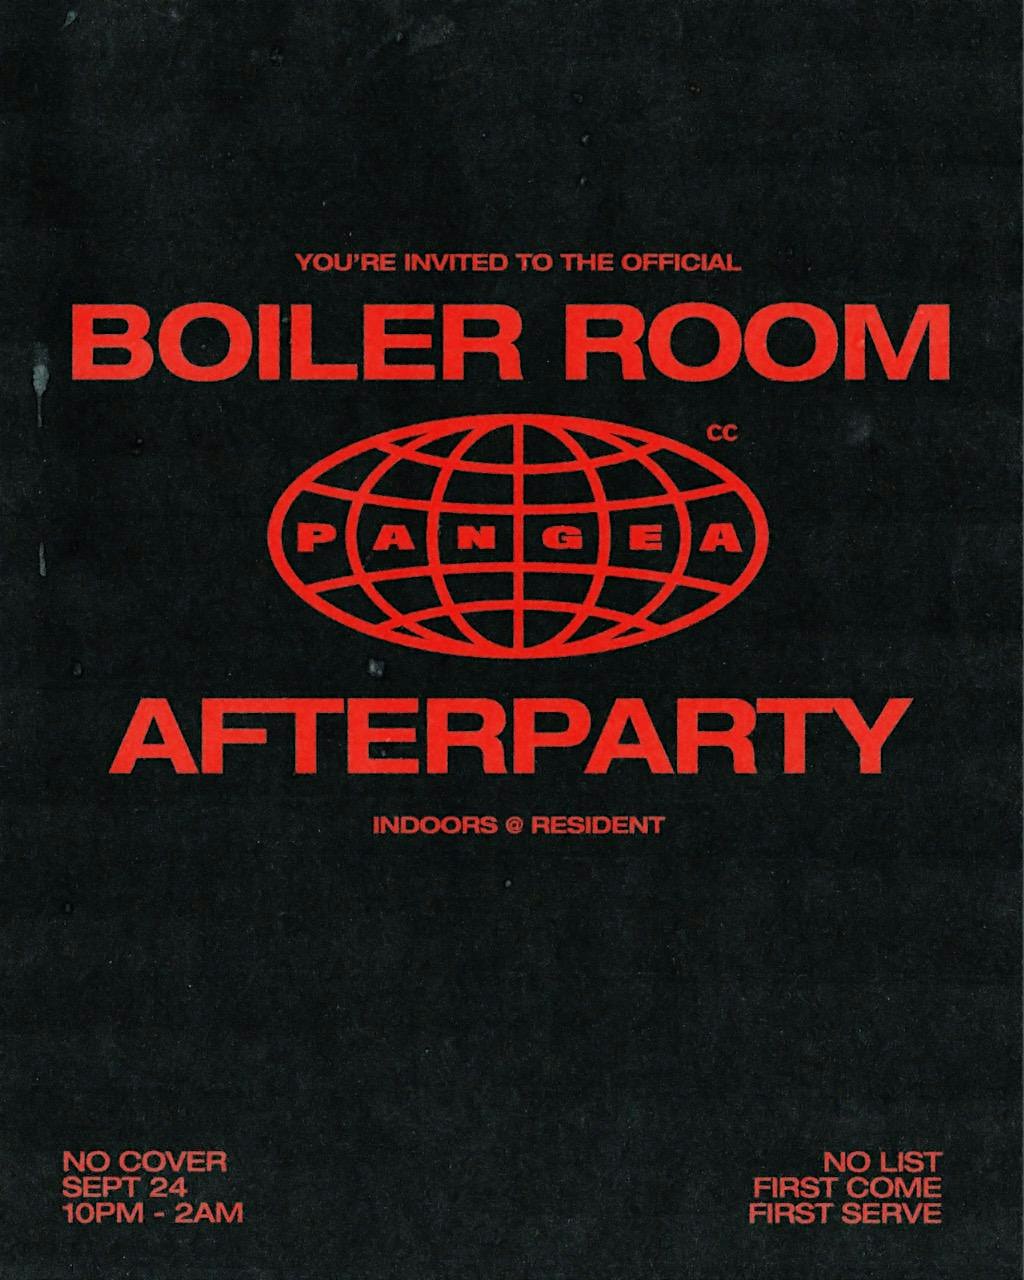 Pangea Sound x Boiler Room After Party